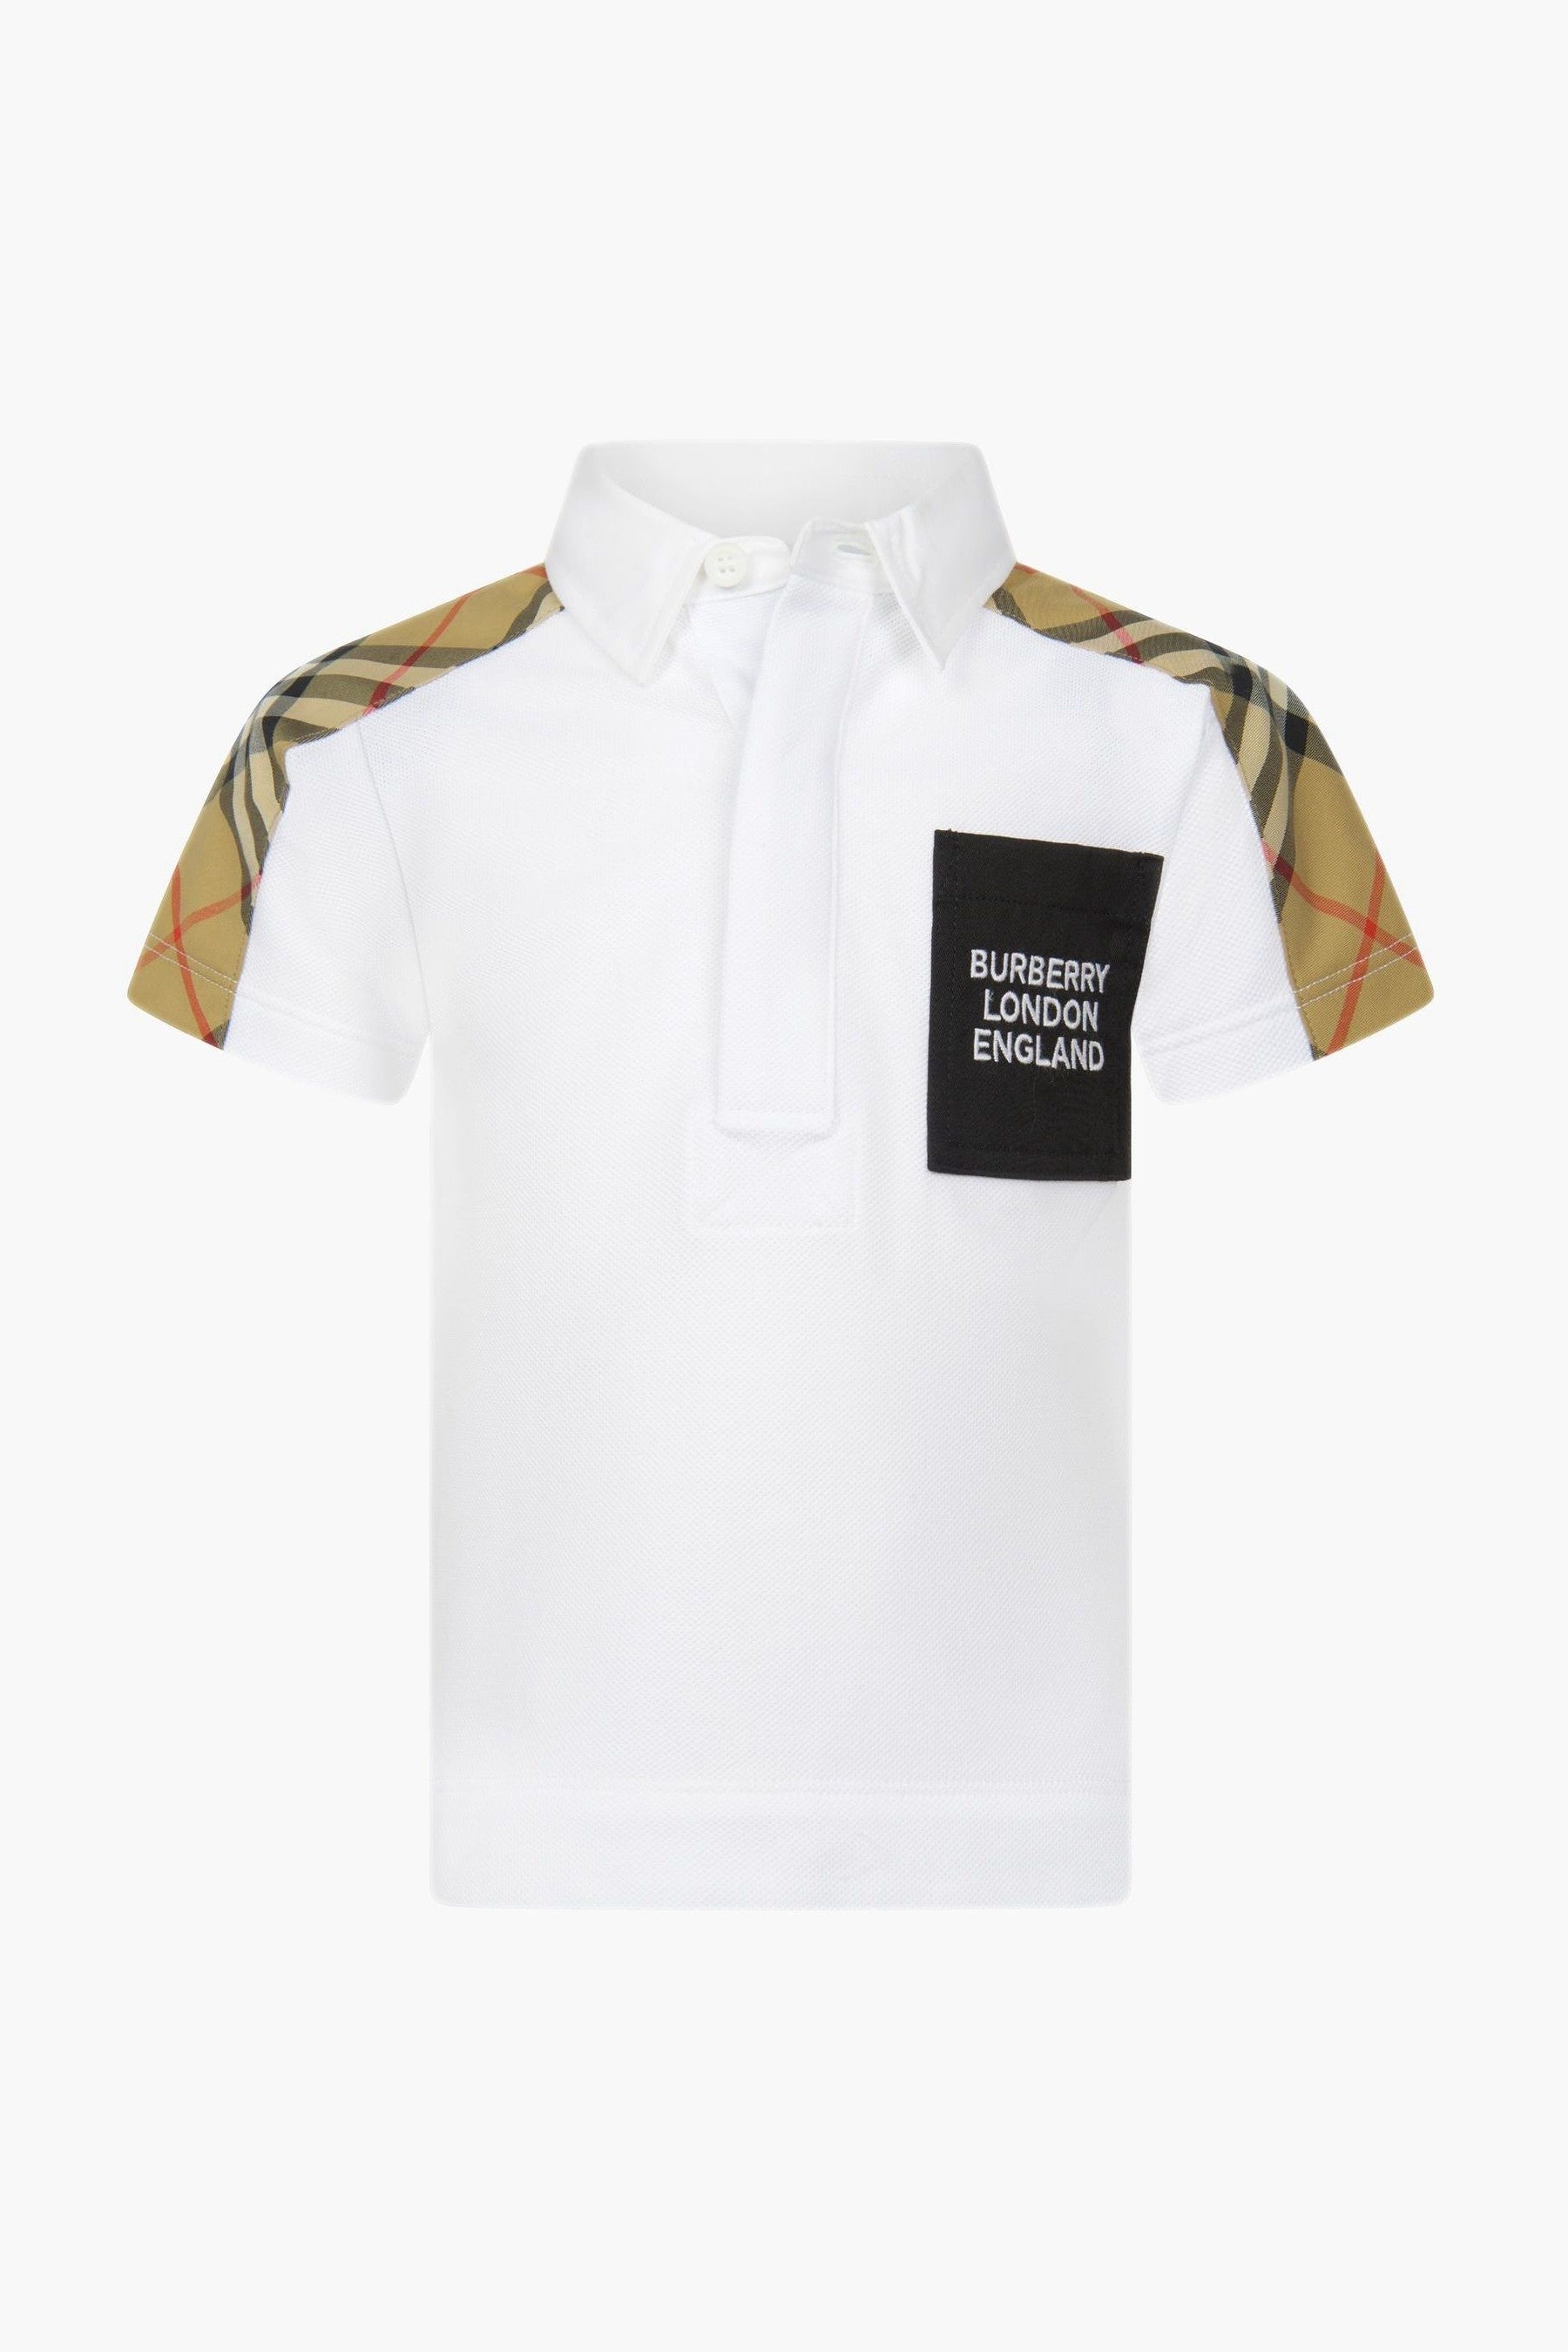 To adapt barbecue To expose Burberry Kids Baby Boys Cotton Branded Polo Shirt | Childsplay Clothing